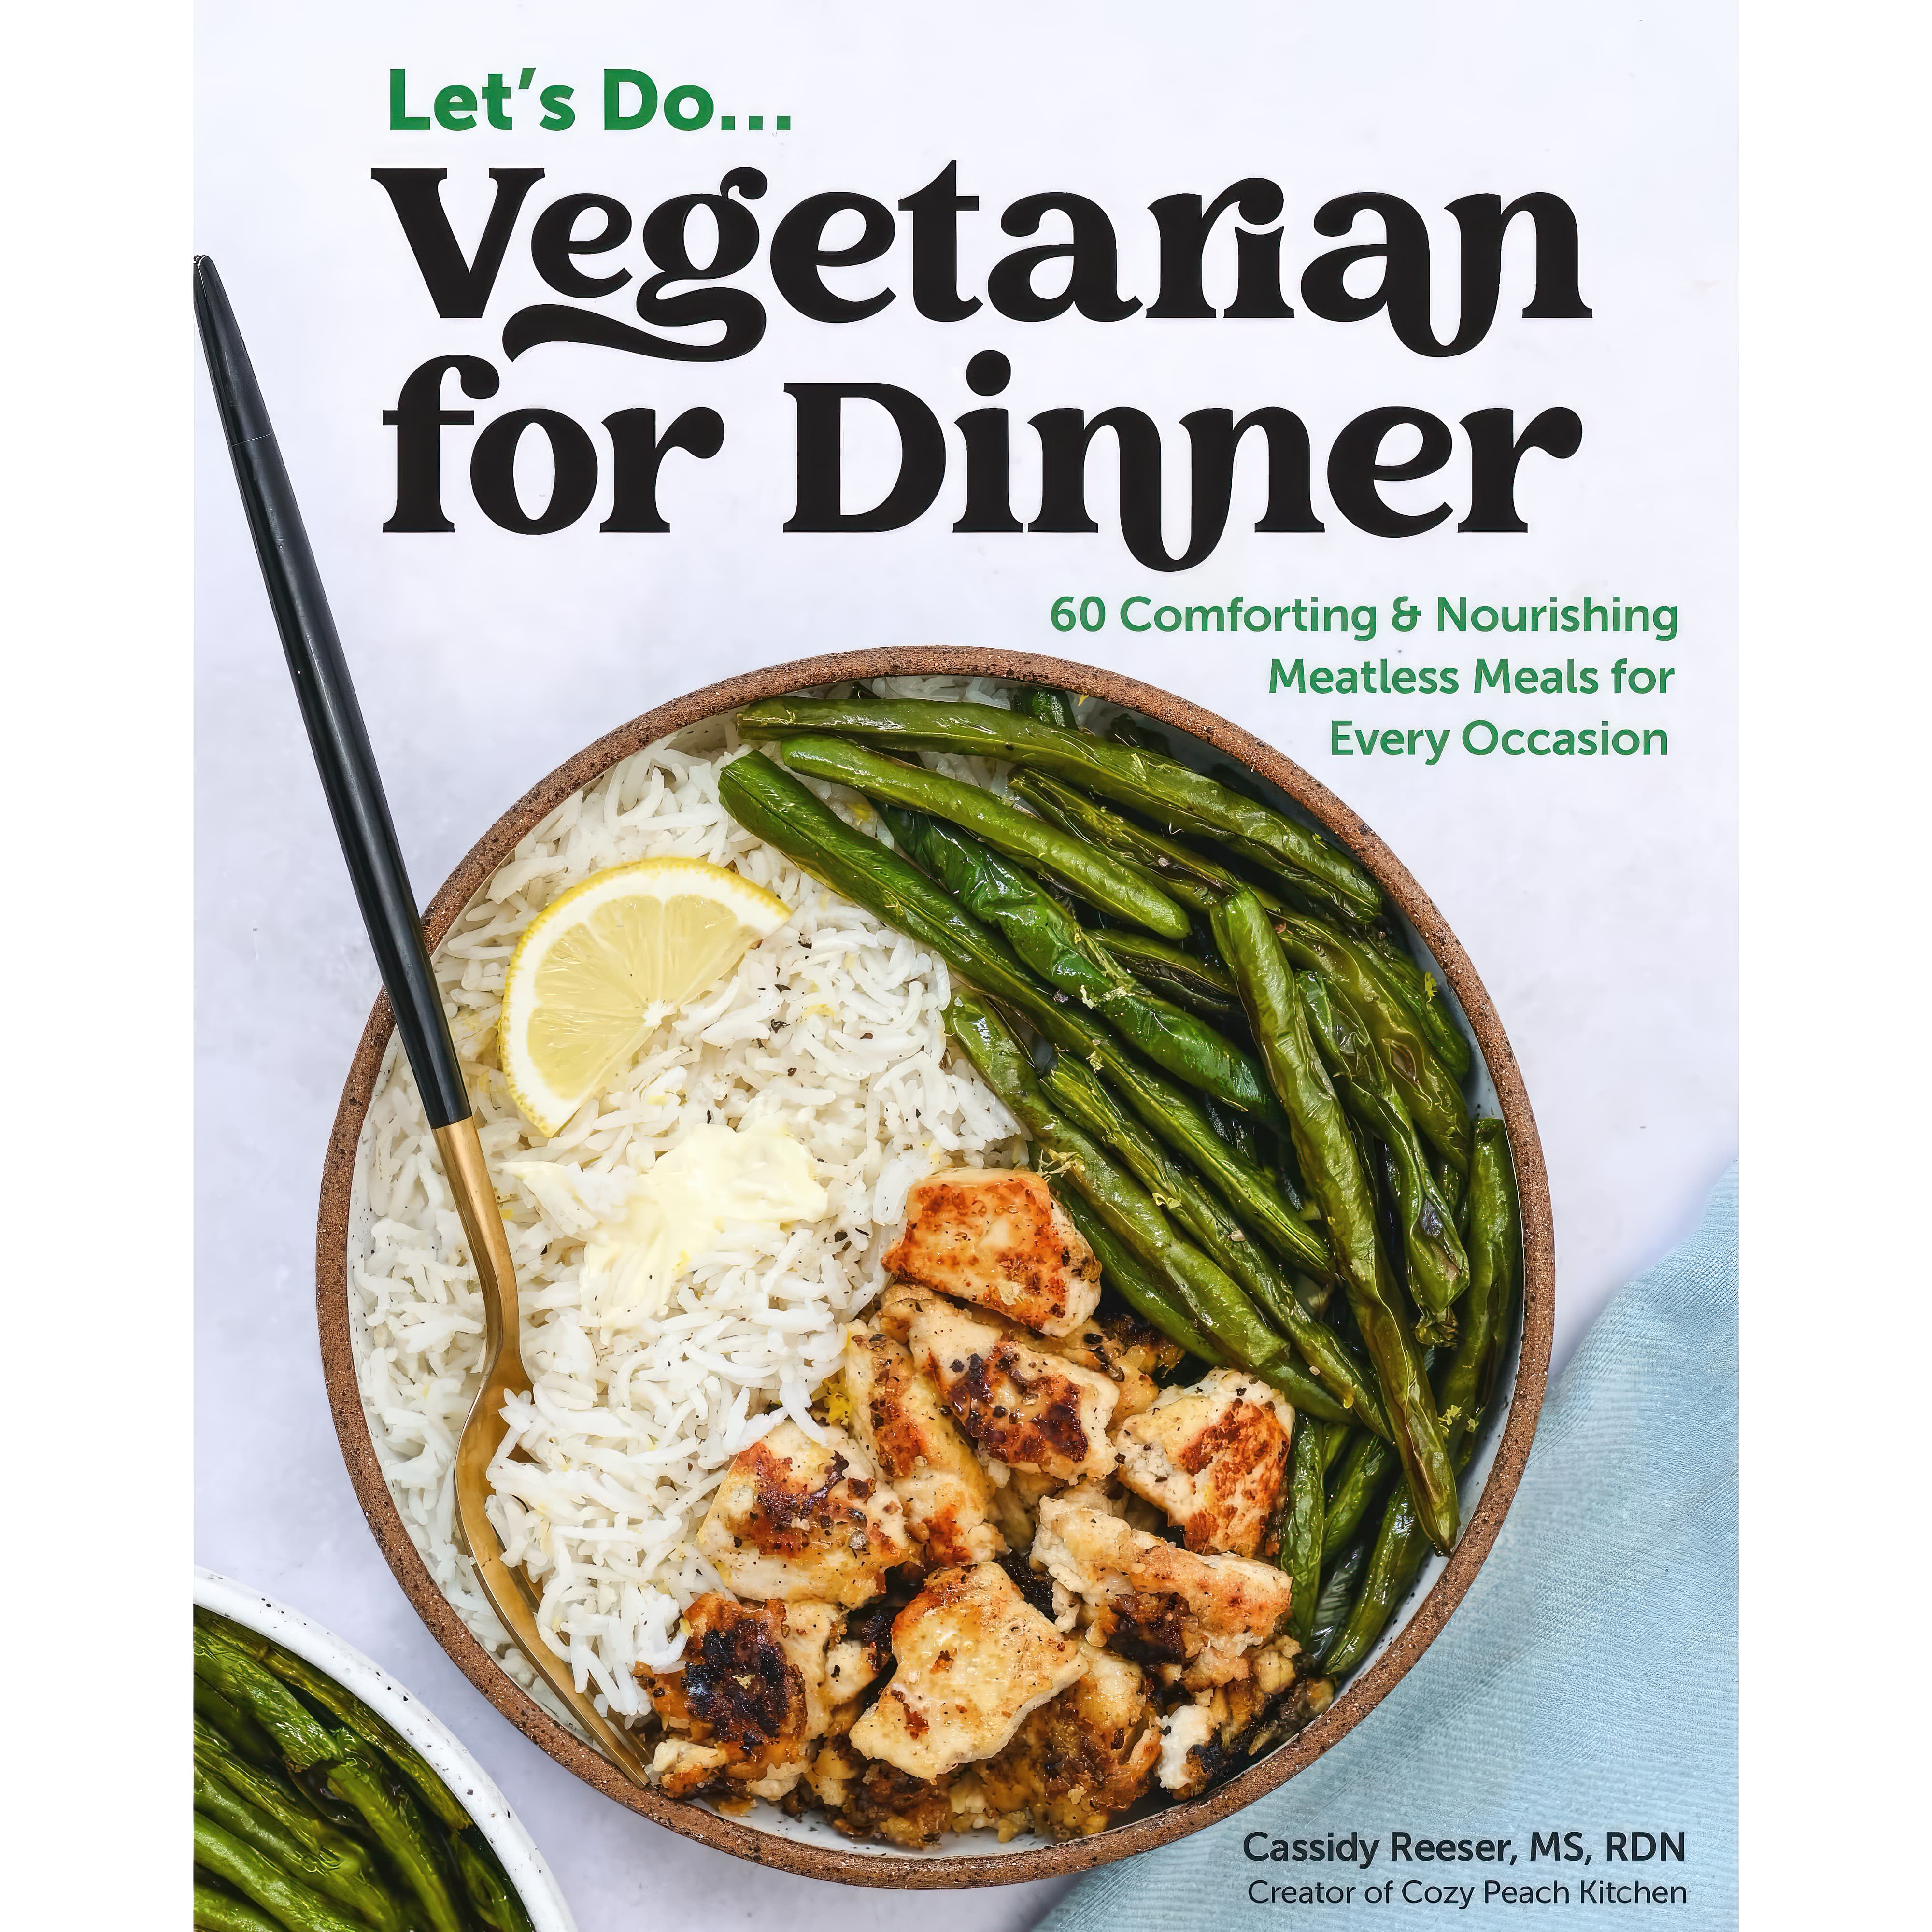 Vegetarian for Dinner by Cassidy Reeser book cover